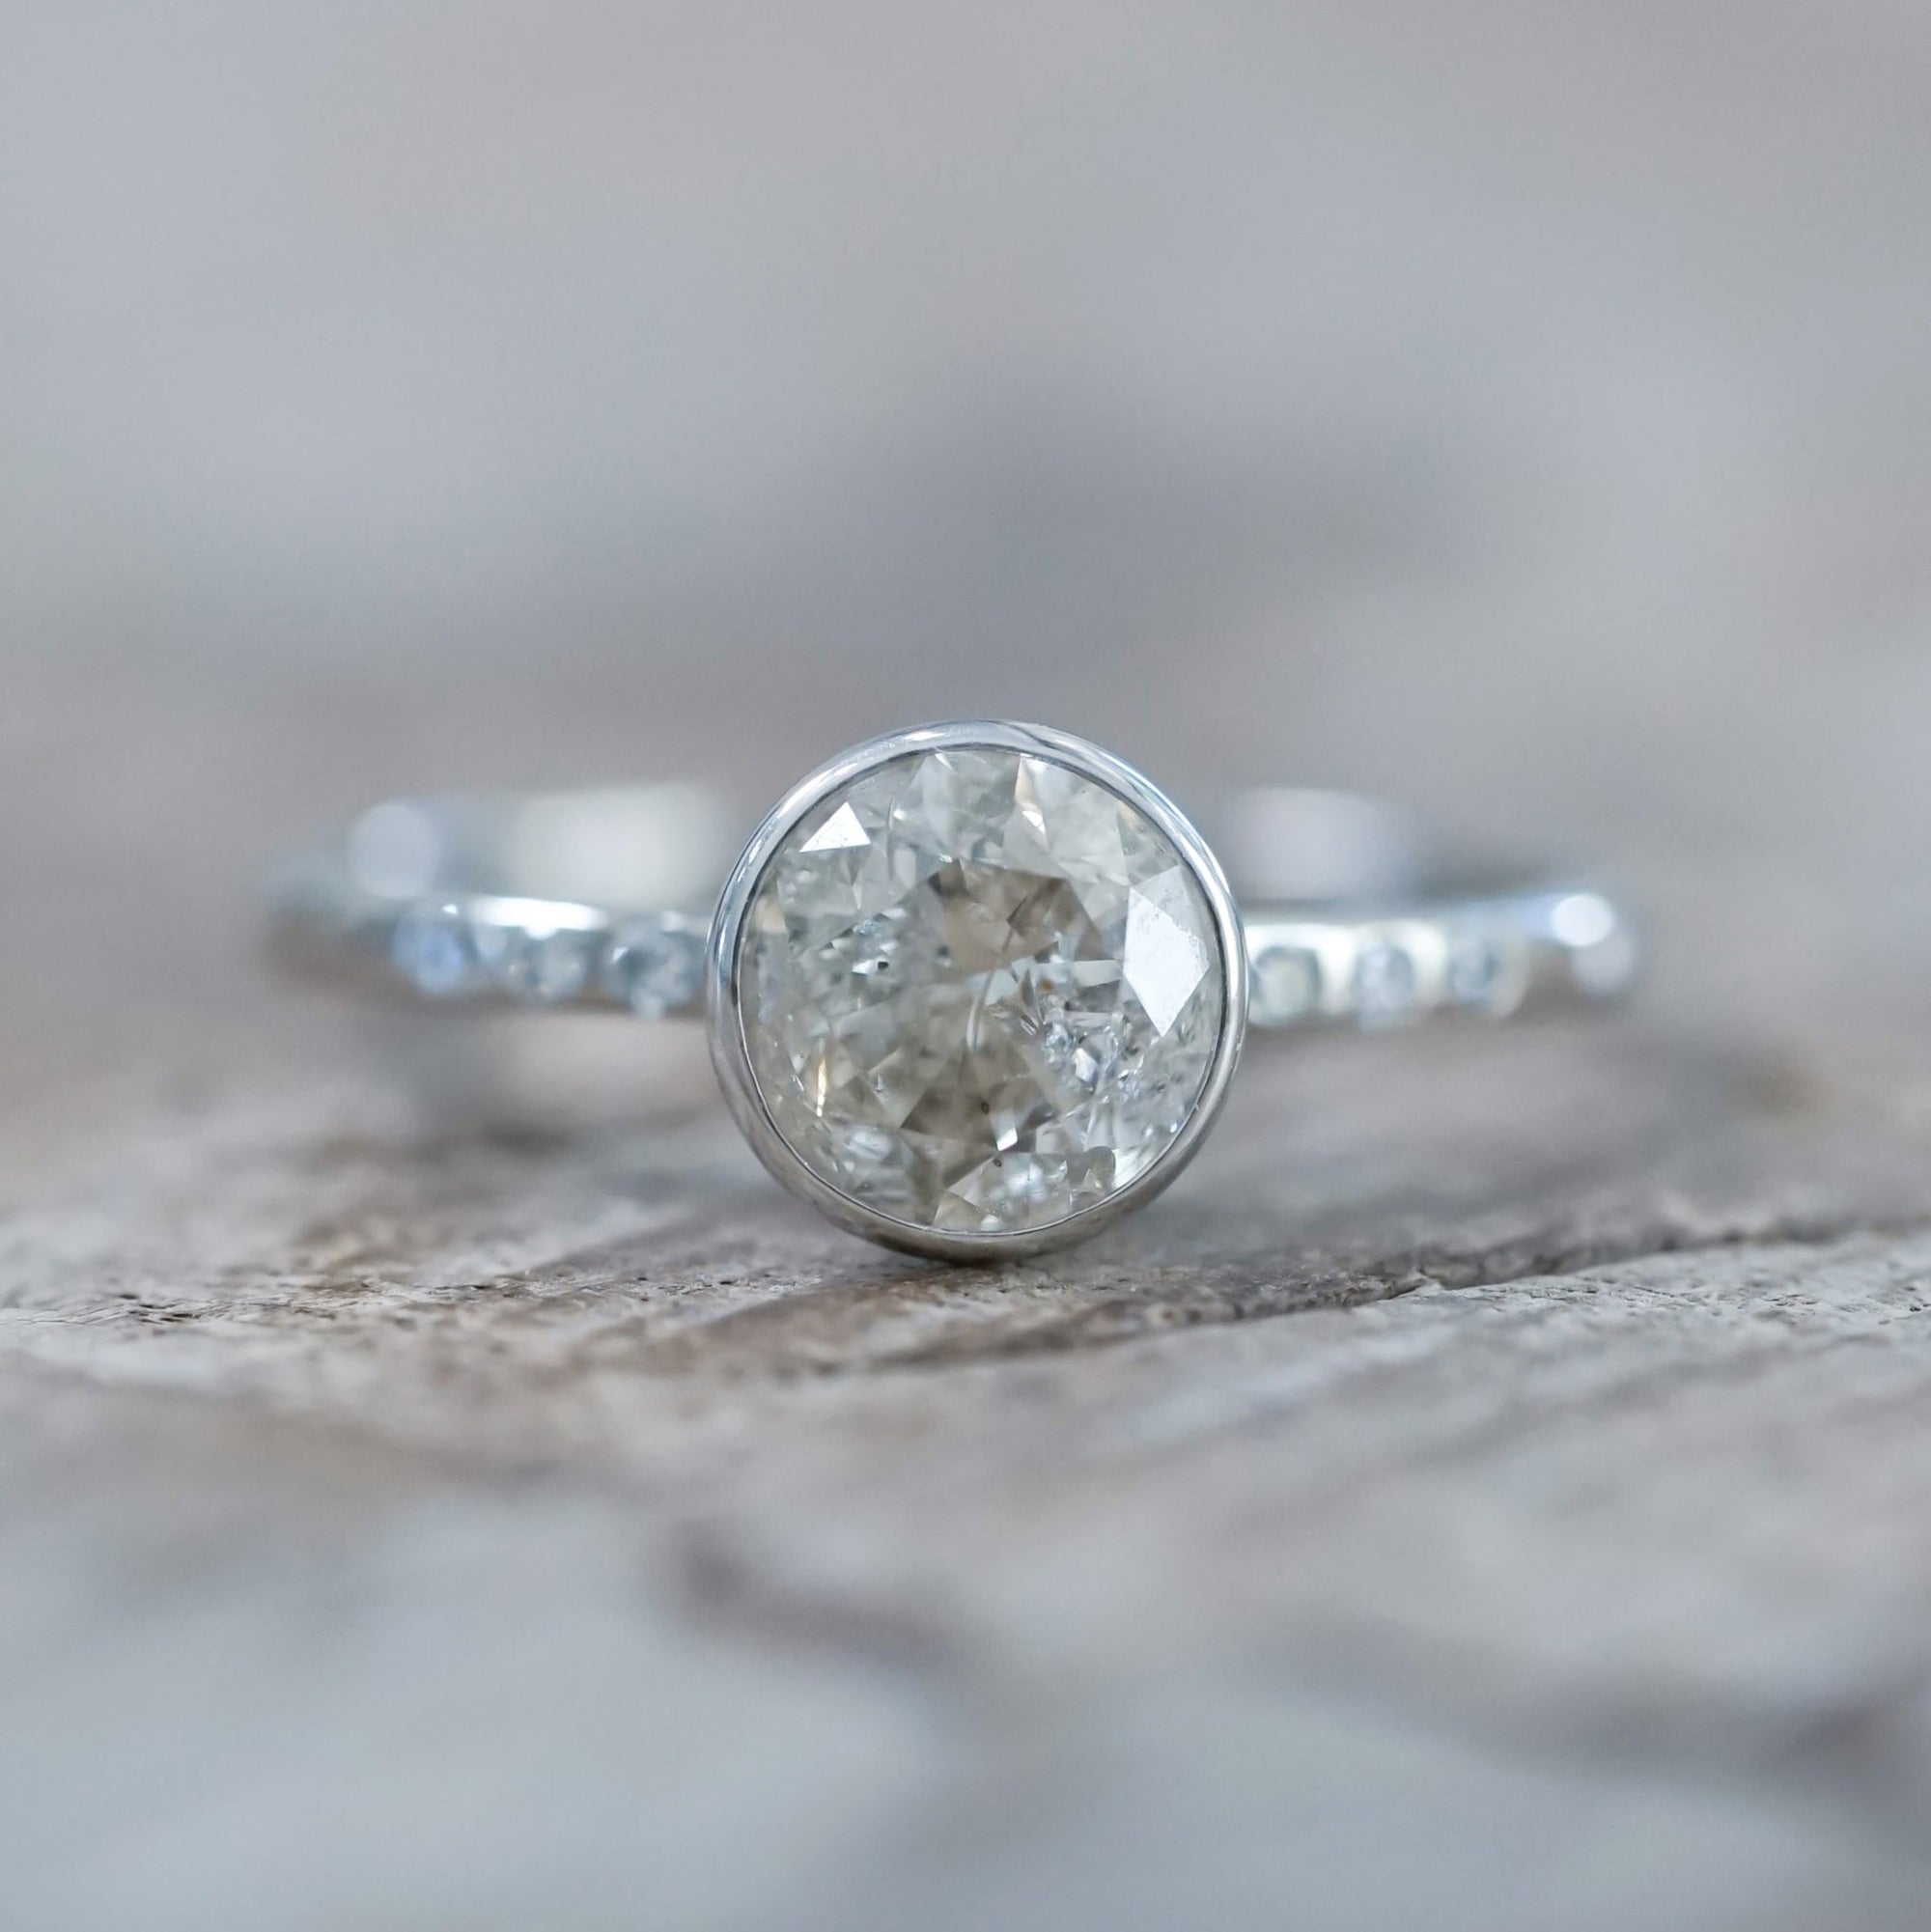 Indonesian Diamond Ring in Ethical White Gold - Gardens of the Sun | Ethical Jewelry